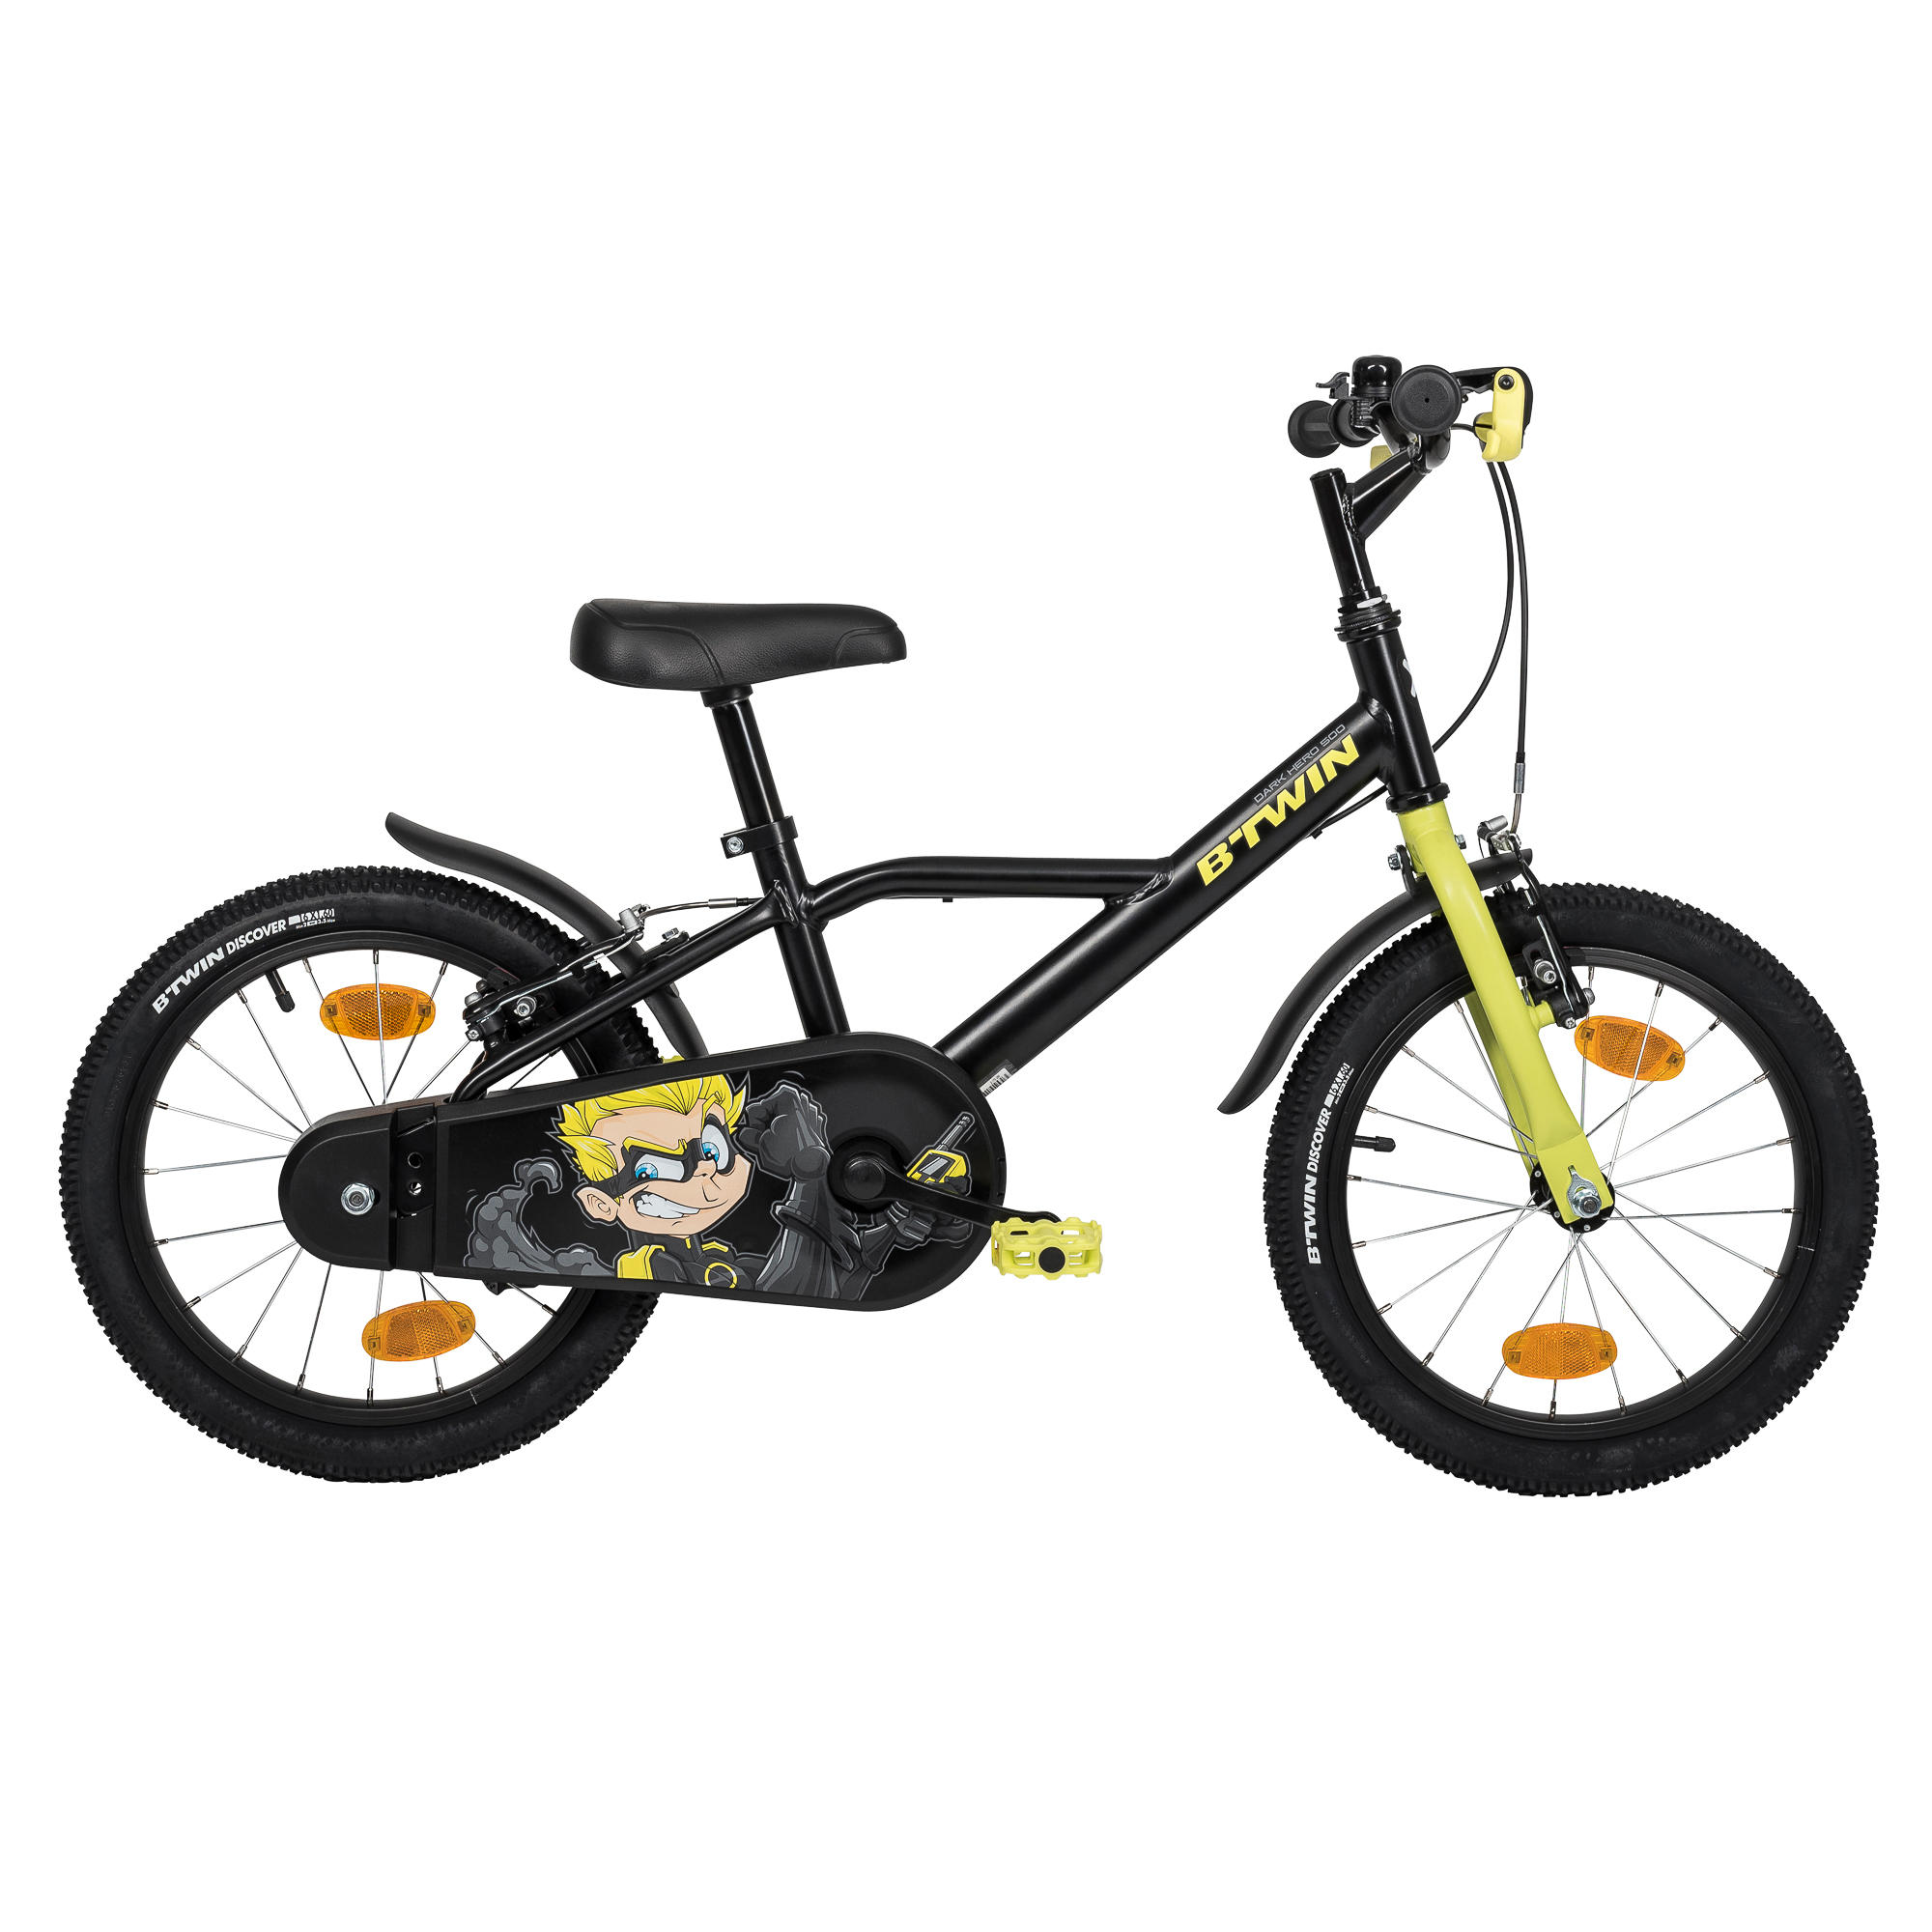 btwin cycle for 6 year old